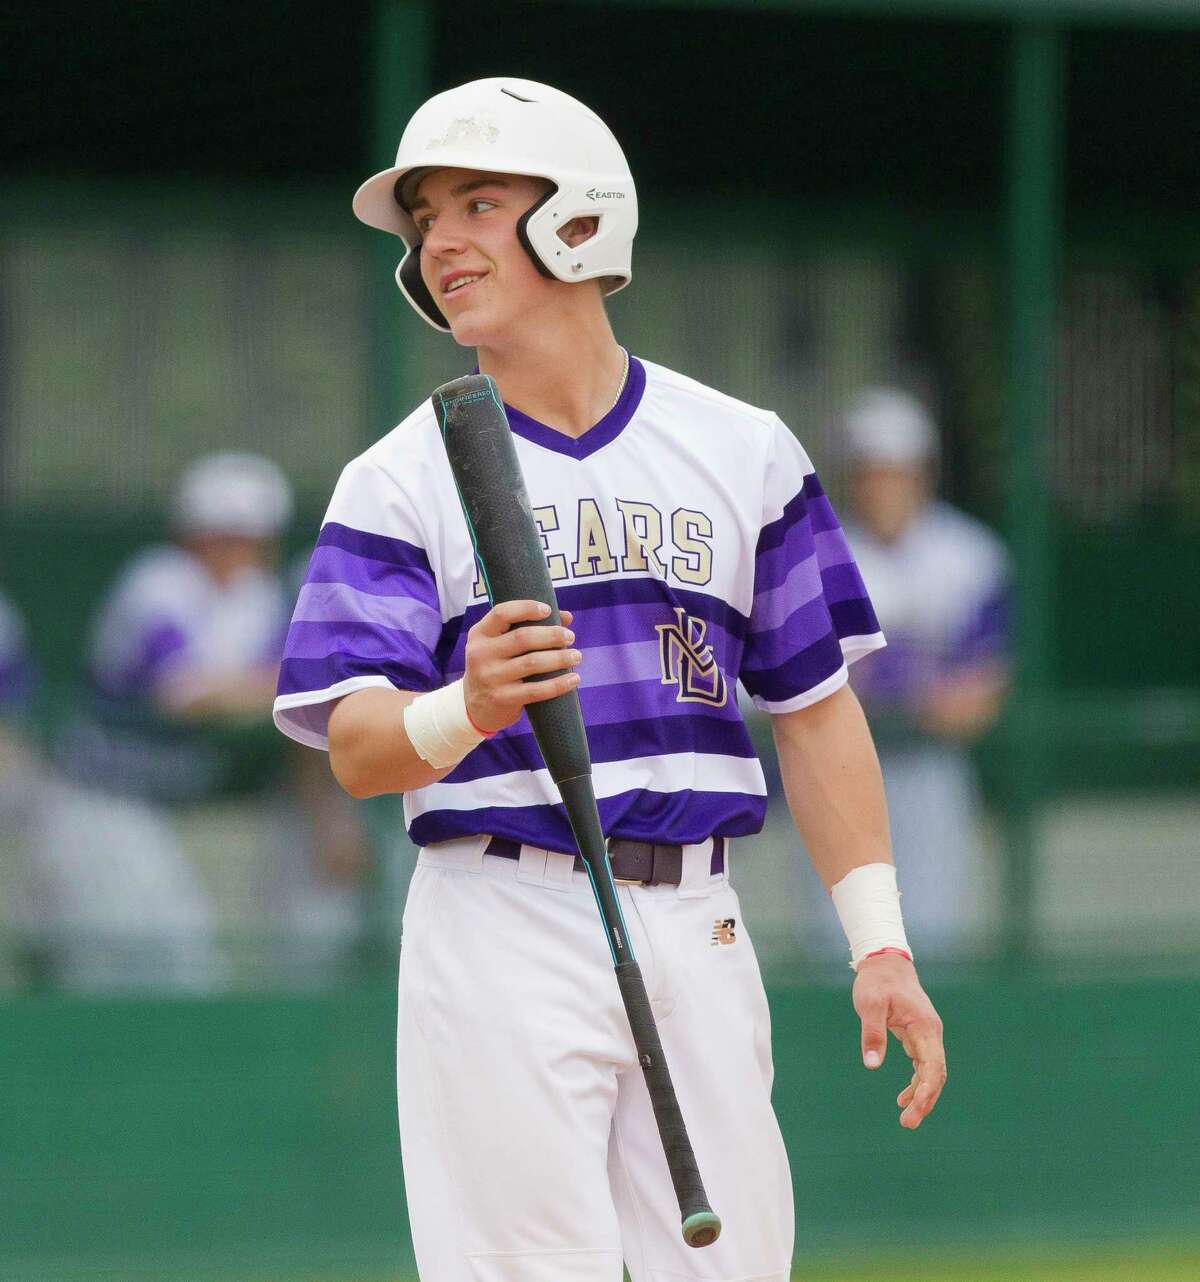 Jacob Prigmore (22) of Montgomery shares a laugh with the home plate umpier before an at bat in the second inning of a high school baseball game during the Montgomery-Brenham Tournament, Saturday, March 3, 2018, in Montgomery.